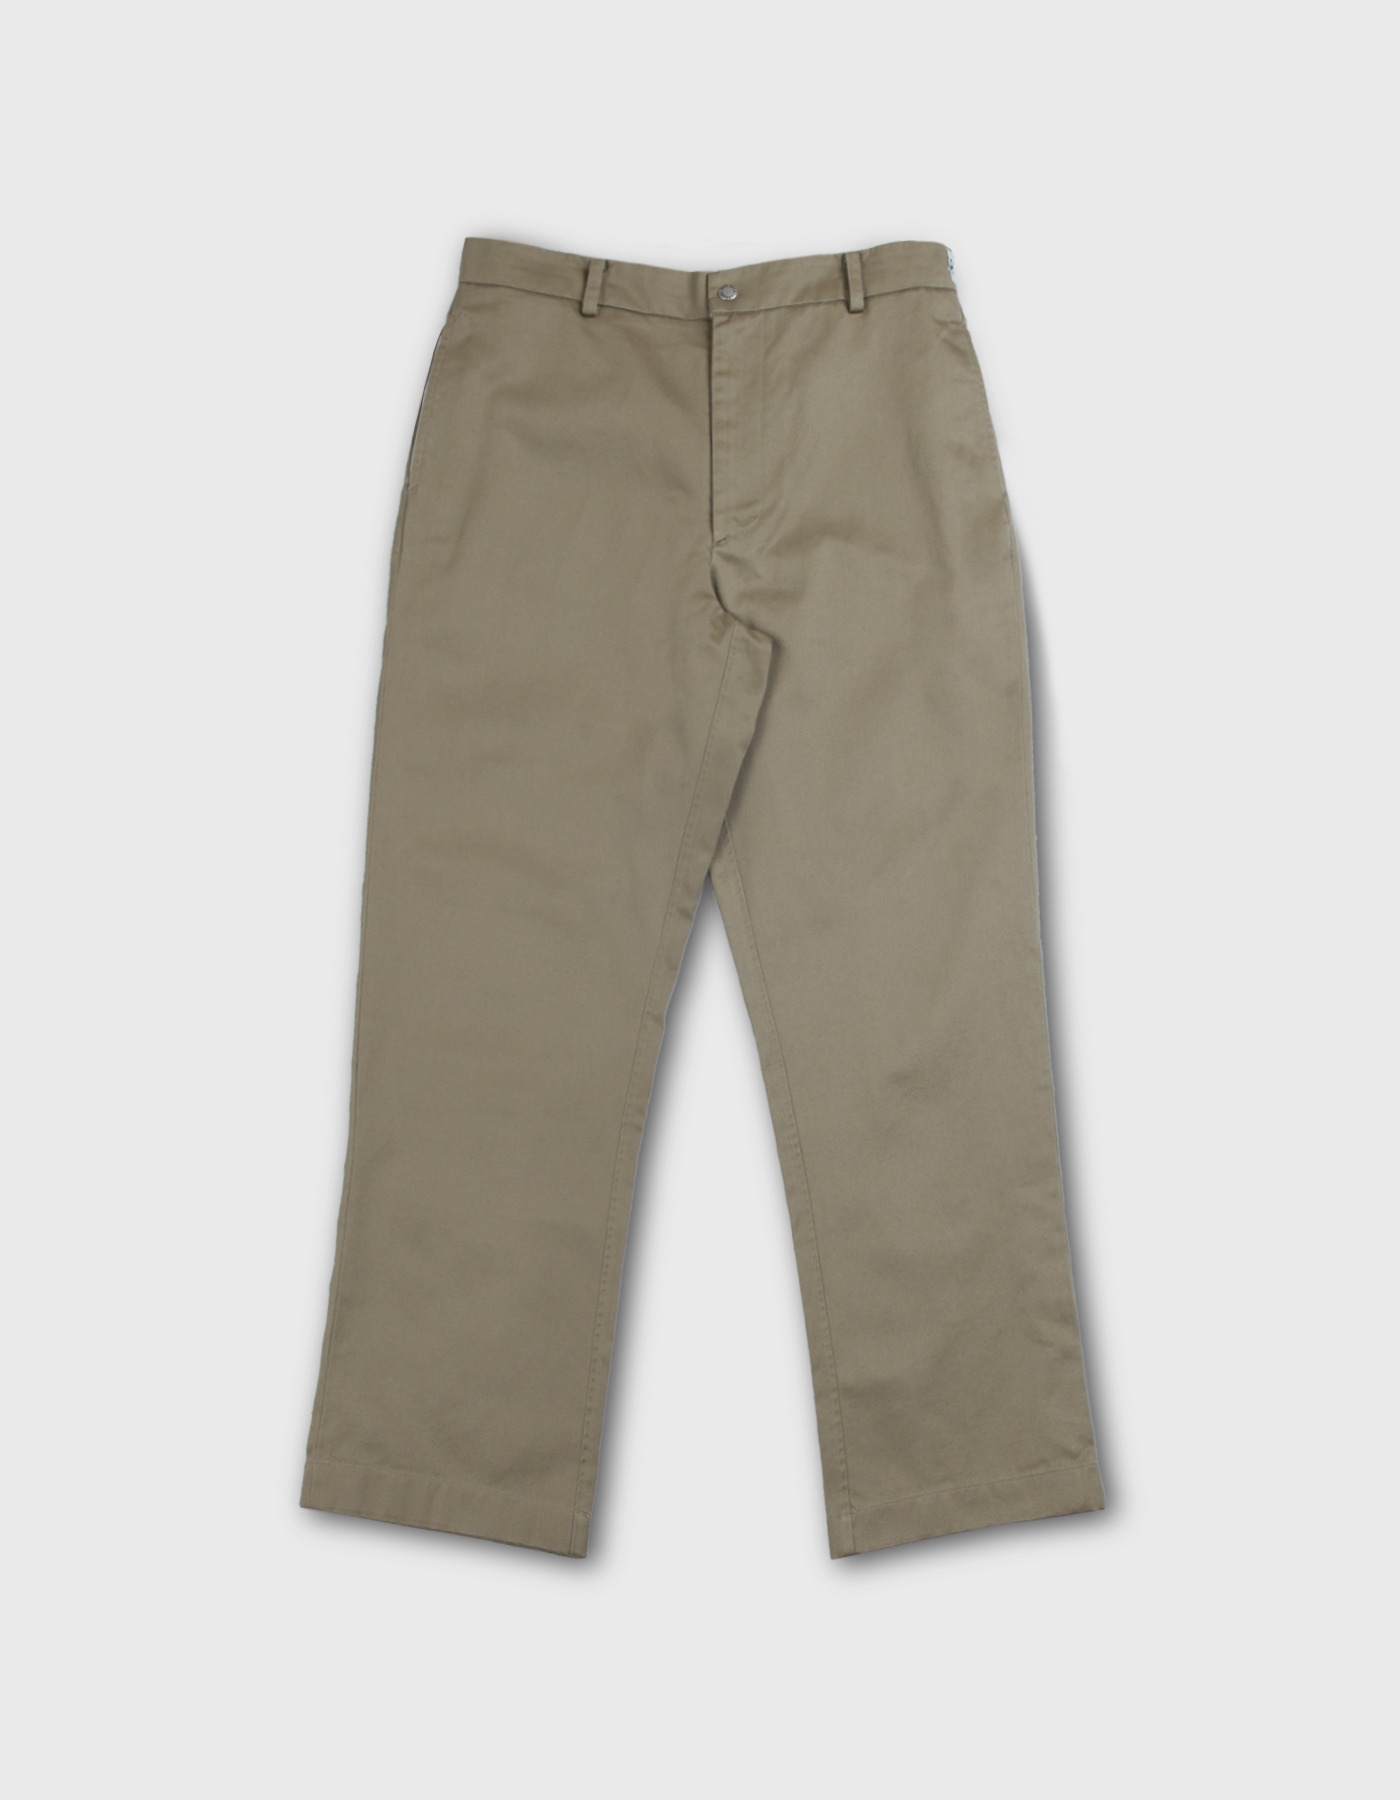 WEAPON TWILL CHINO PANTS / Beige